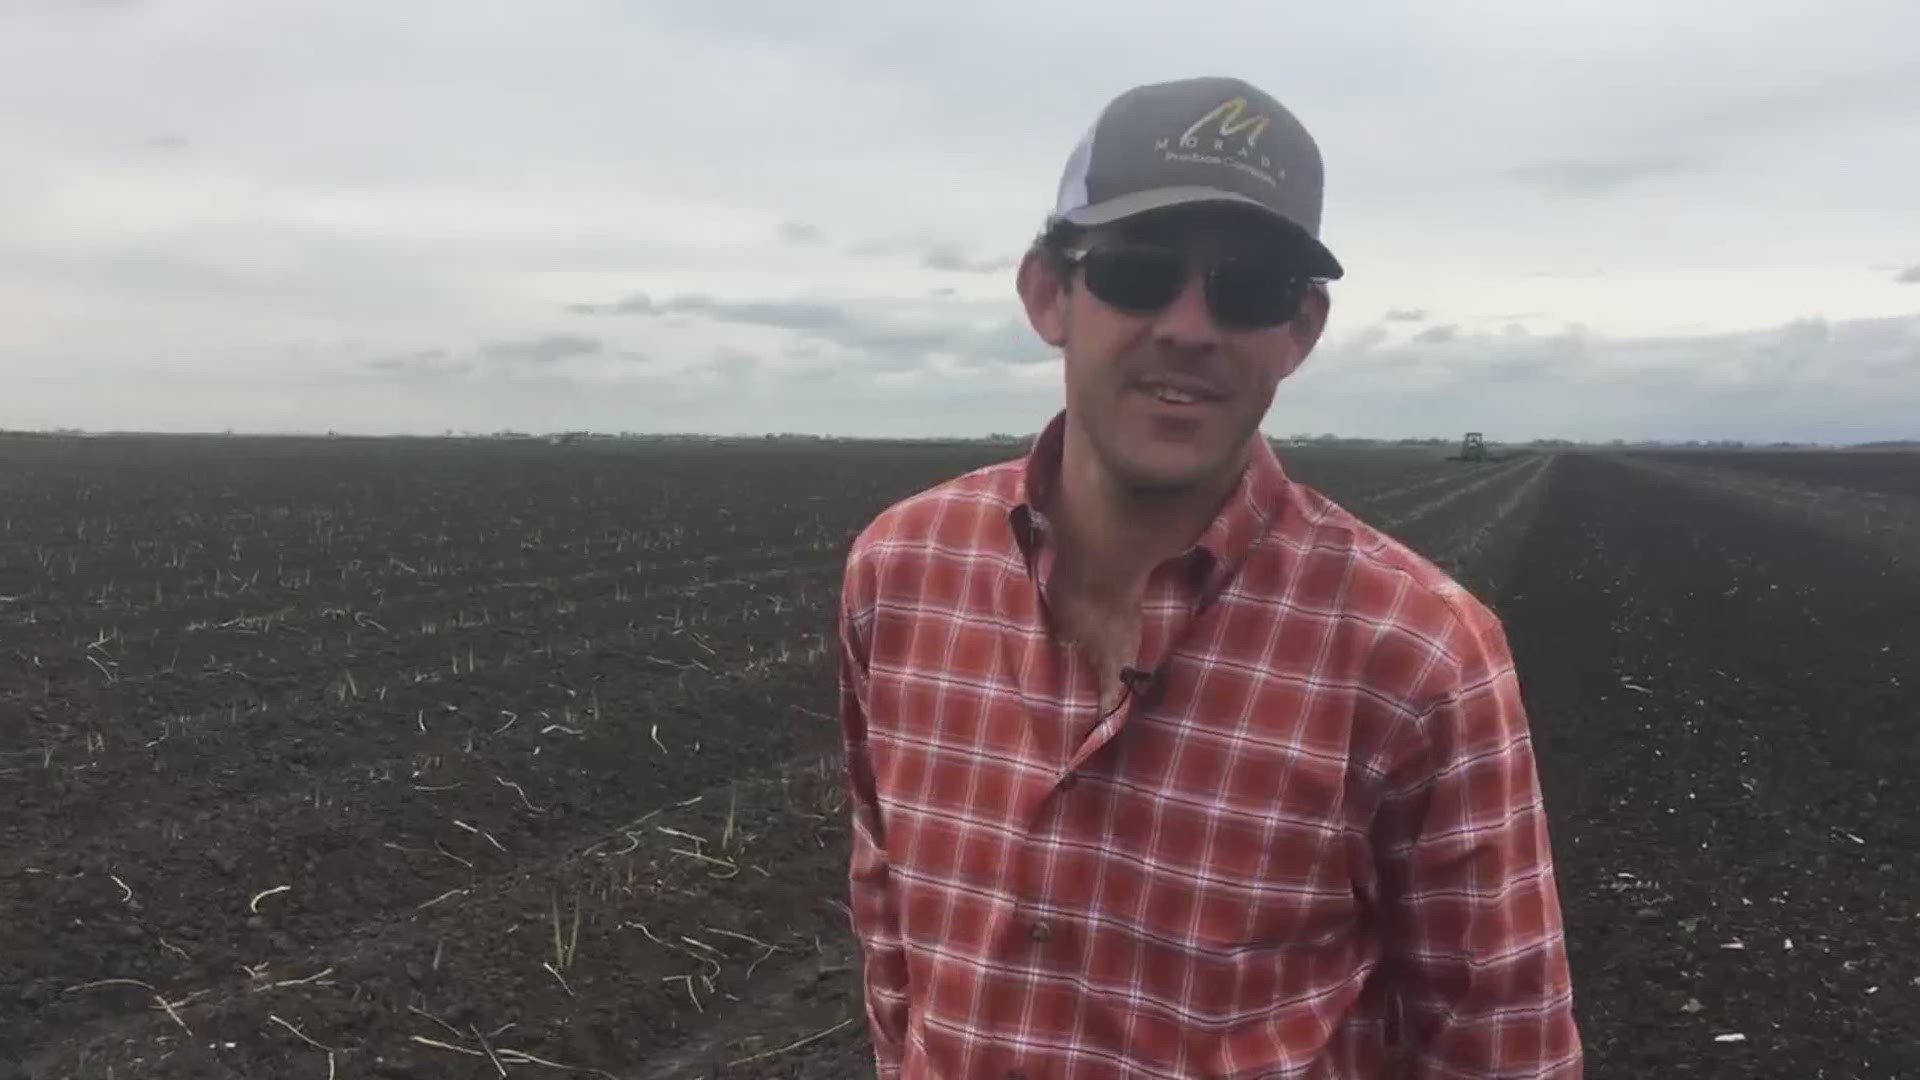 Jeff Klein, with Klein Family Farms, tells ABC10 that the 10,000-acre farm is "discing out" 200 acres of perfectly good asparagus because he can't compete with imported asparagus from Mexico. That means that after all of his hard work, his crop is literally going to waste because it isn't being purchased.